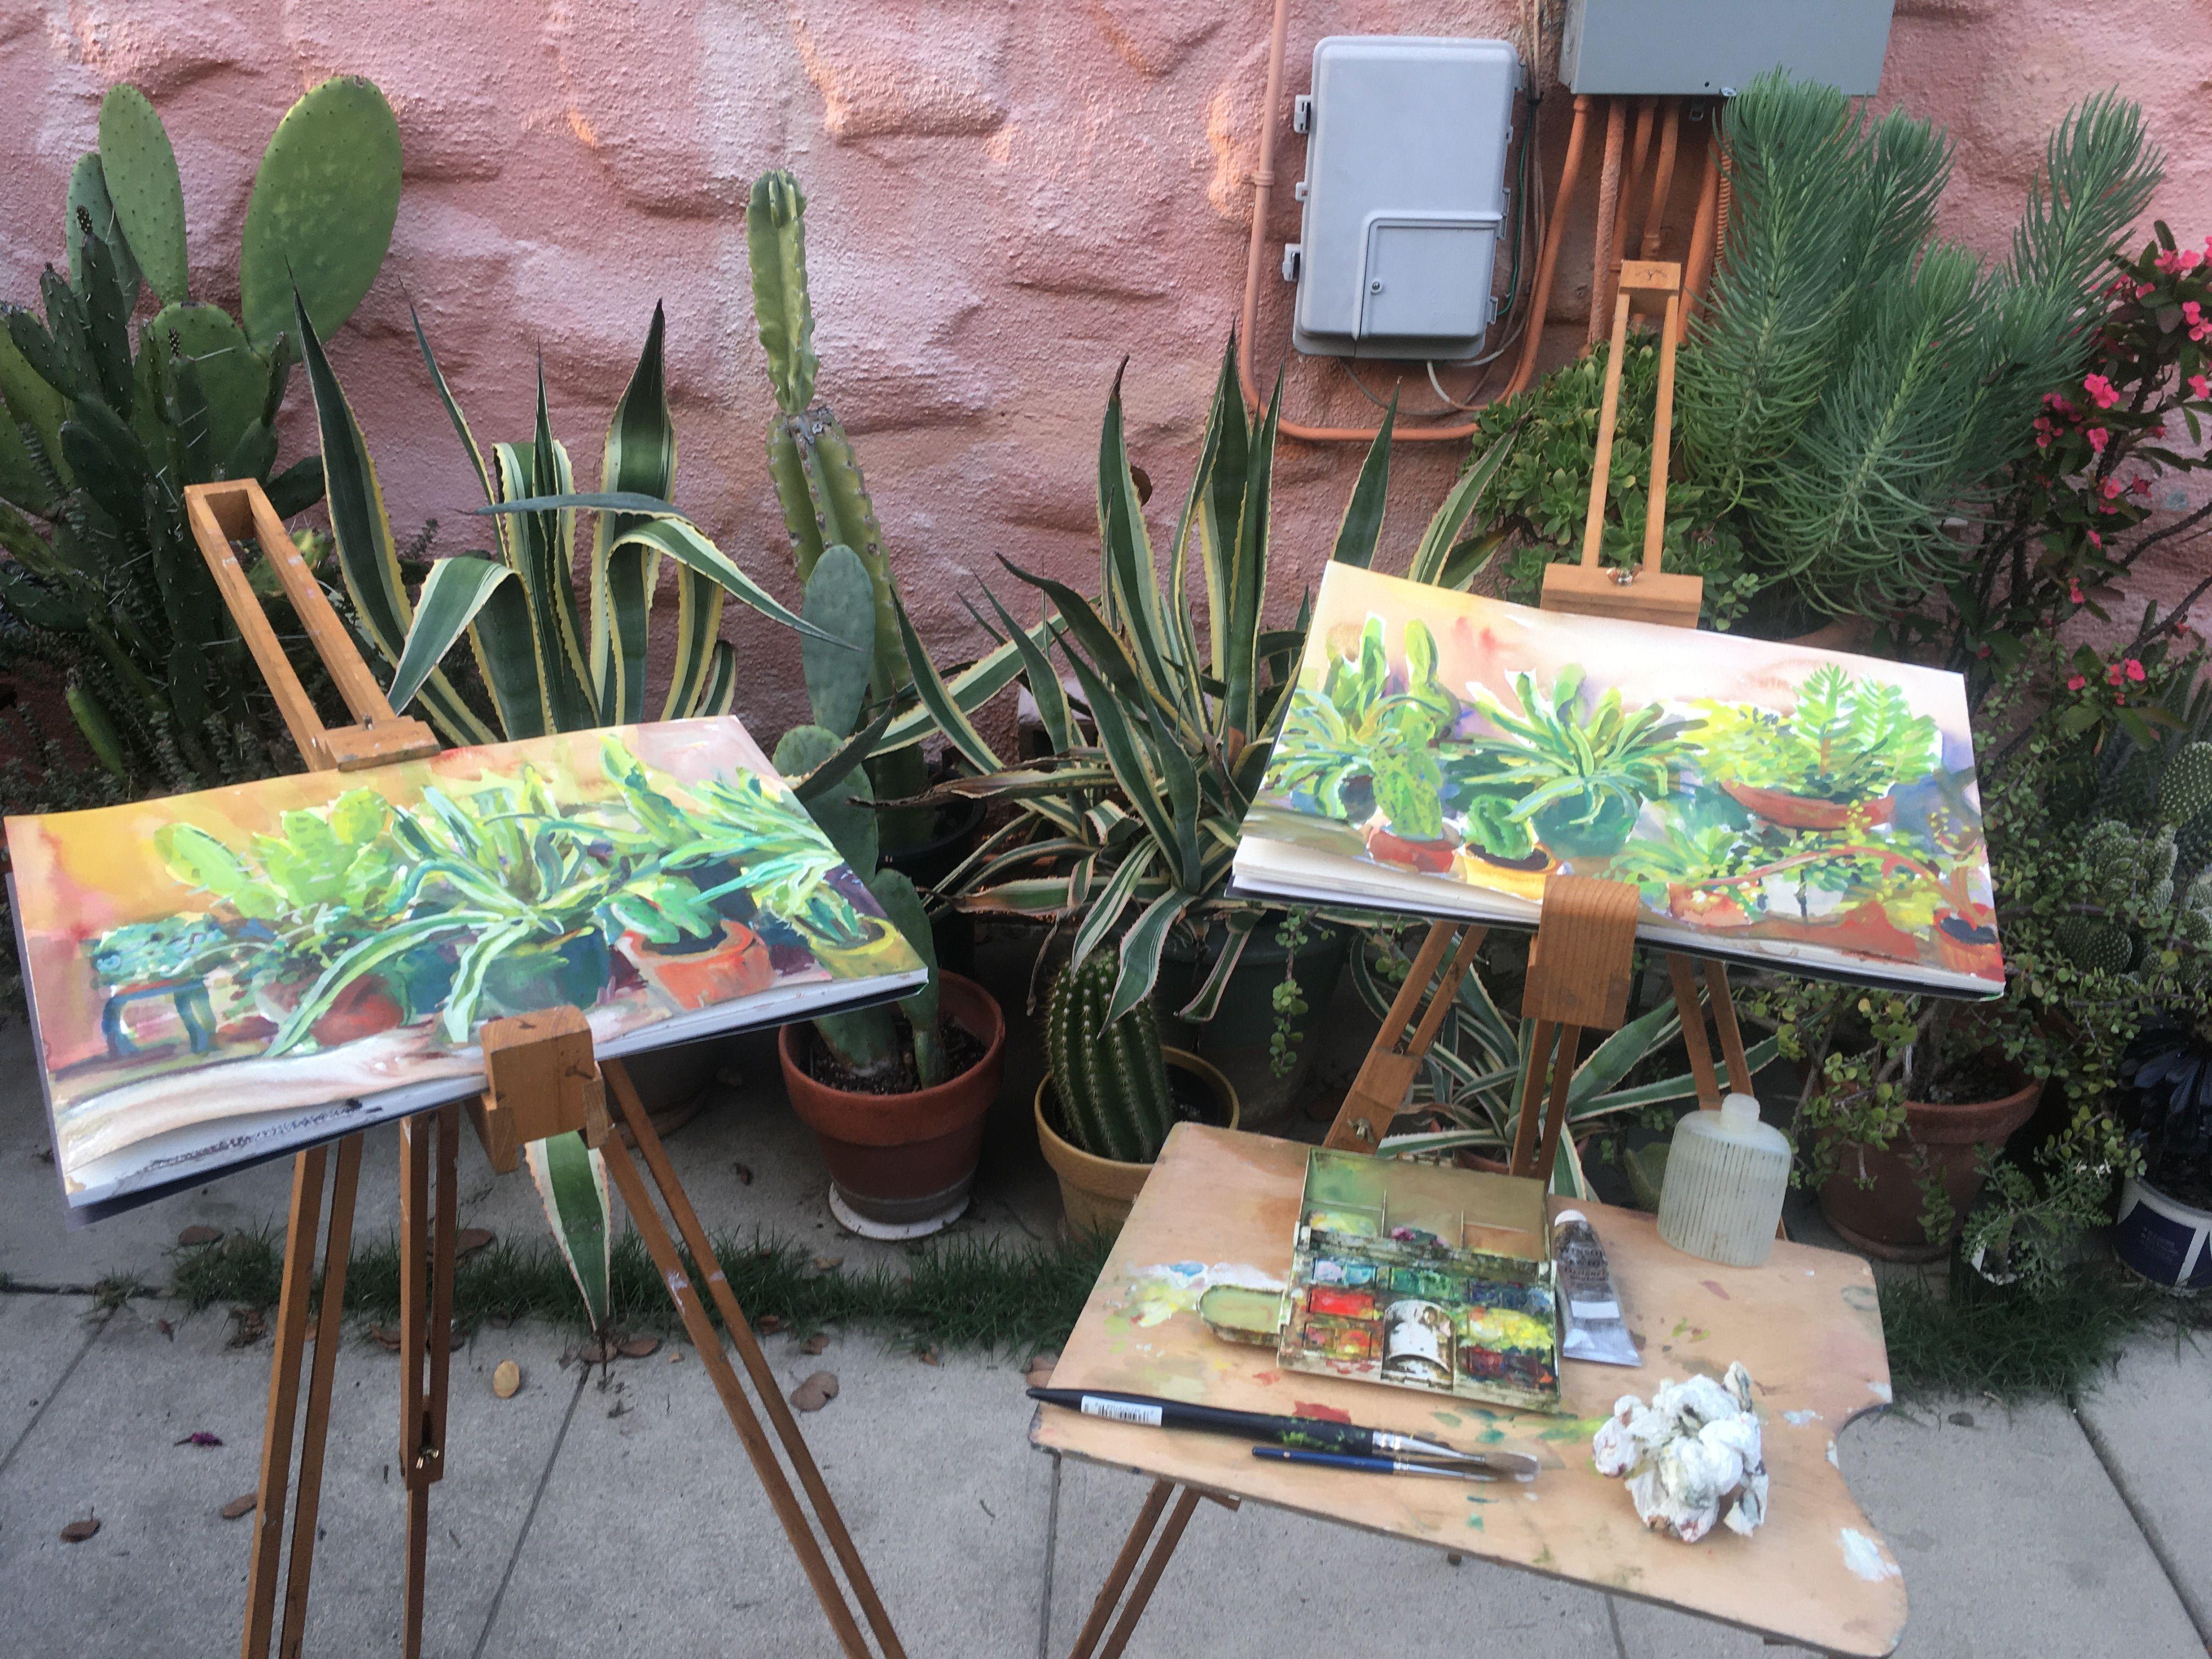 Plein air watercolor of the cactus plants in the backyard. I did two watercolors at the same time. The other one is listed too. It's titled 